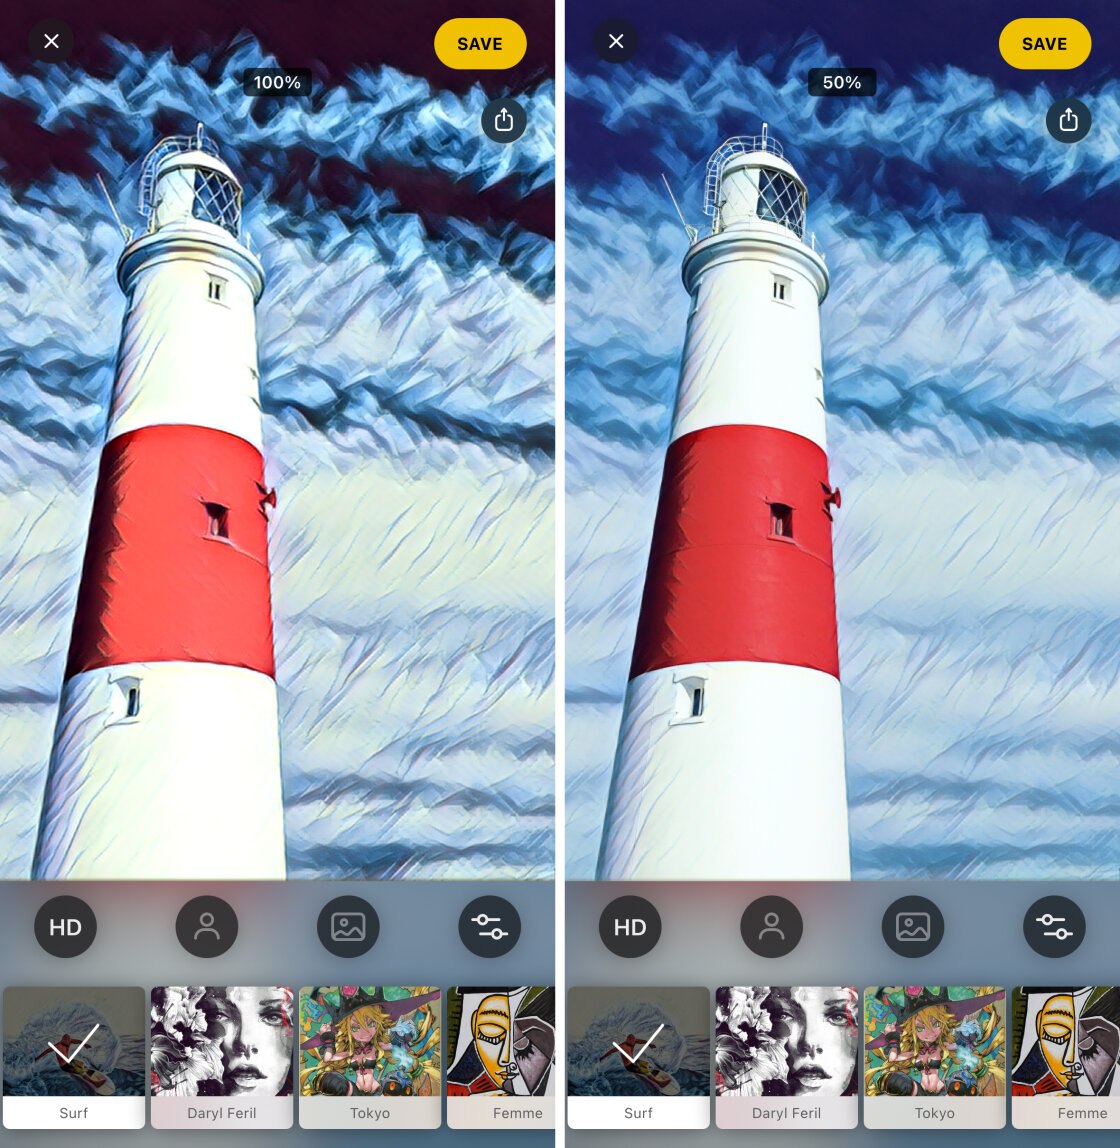 , 5 Best iPhone Apps That Turn Photos Into Drawings &#038; Sketches